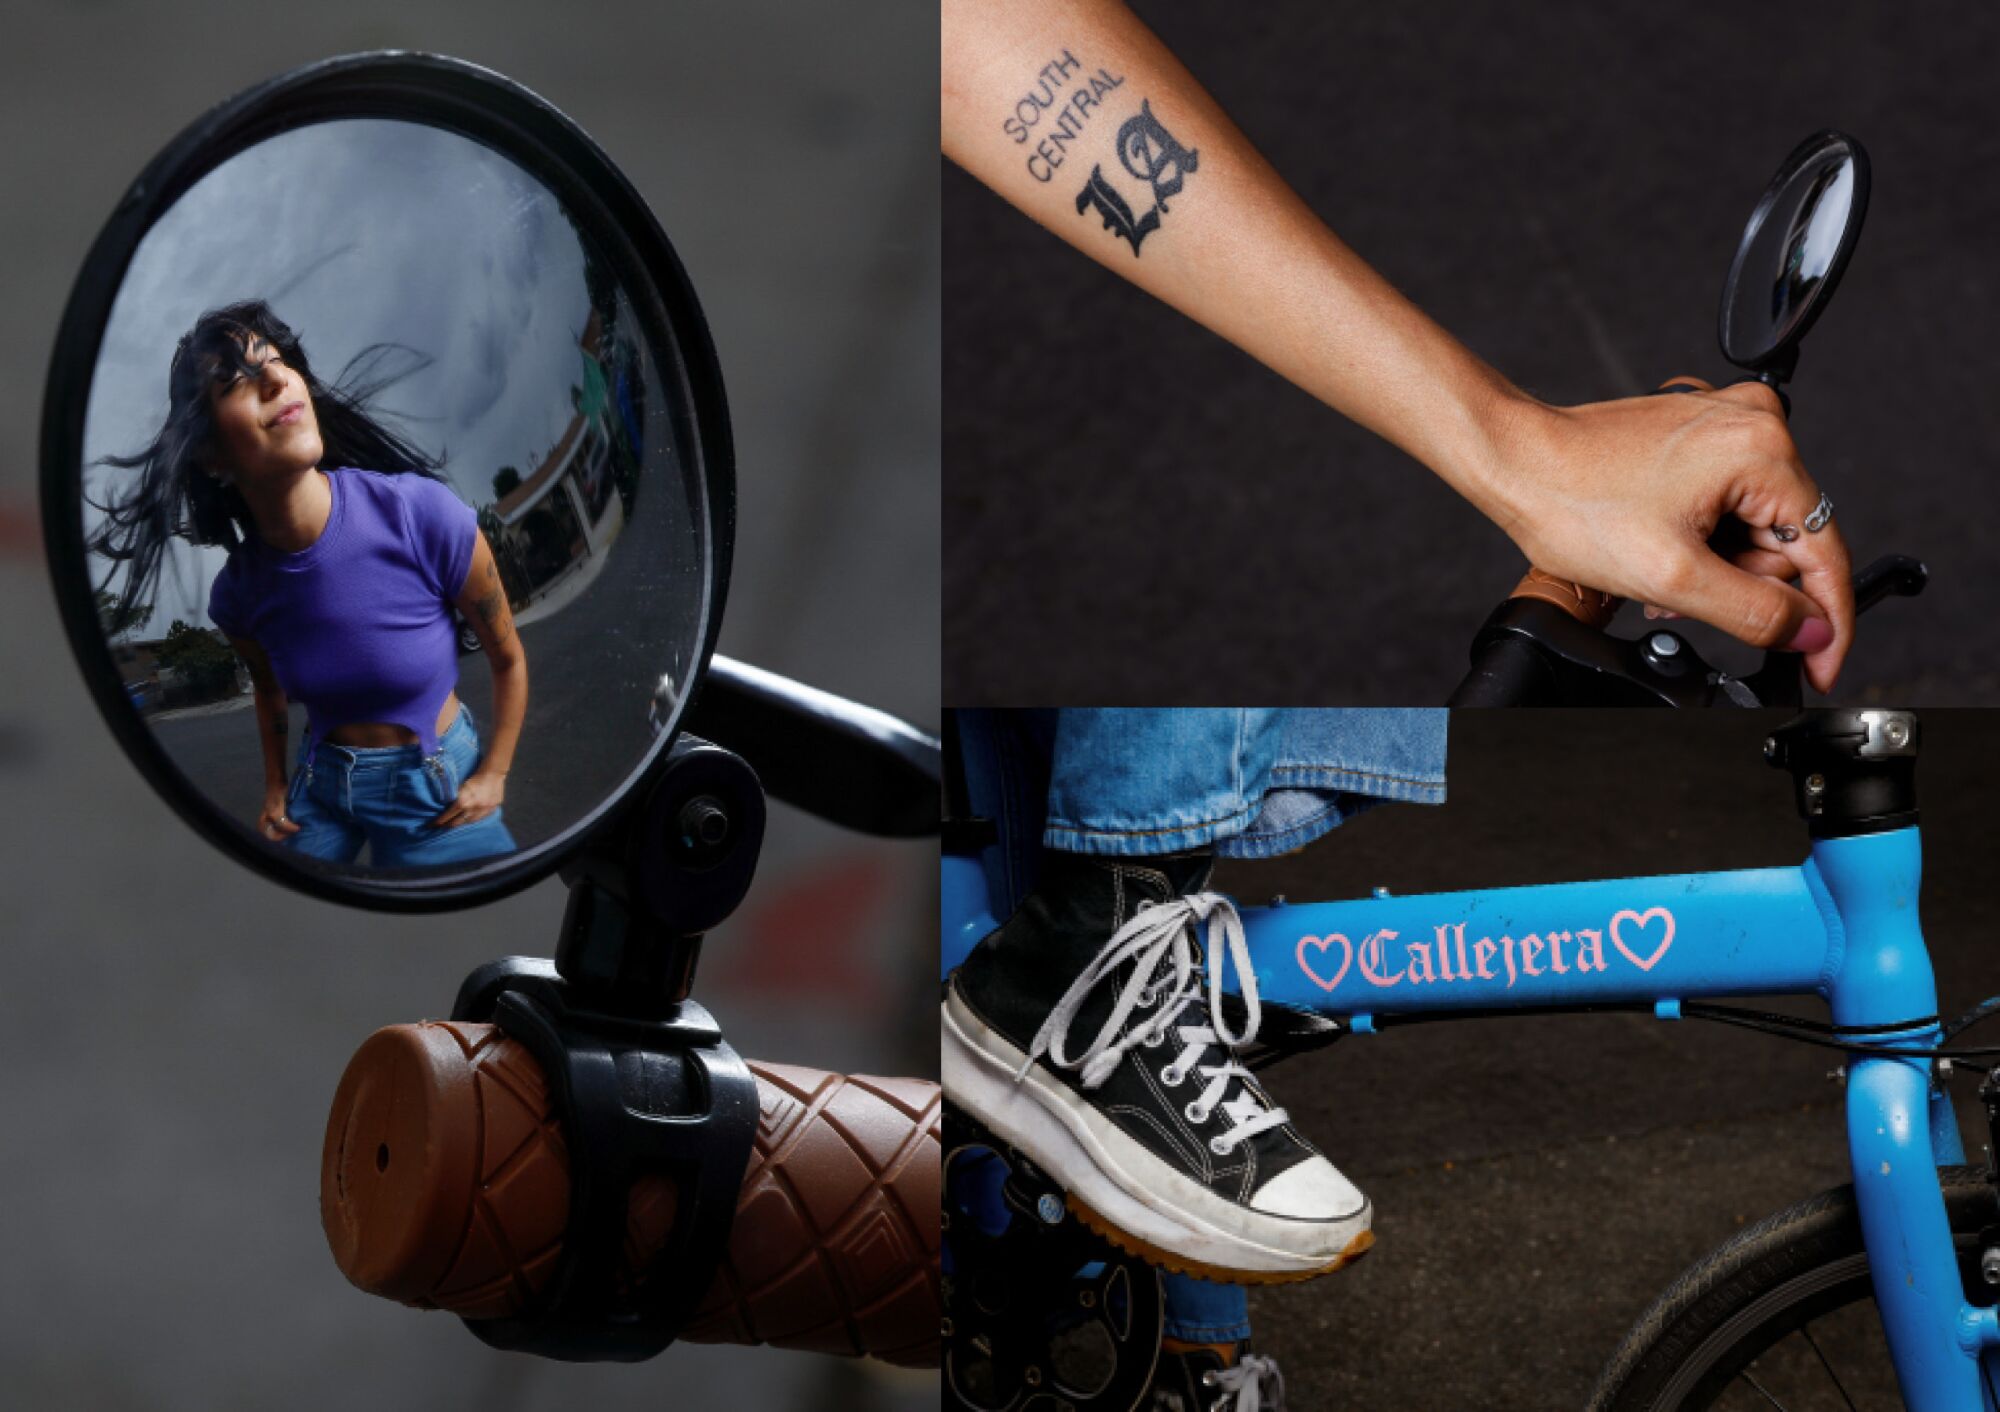 Three photos together of Michelle Moro, with her arm tattooed and her foot with sneakers on the pedal of her bicycle.